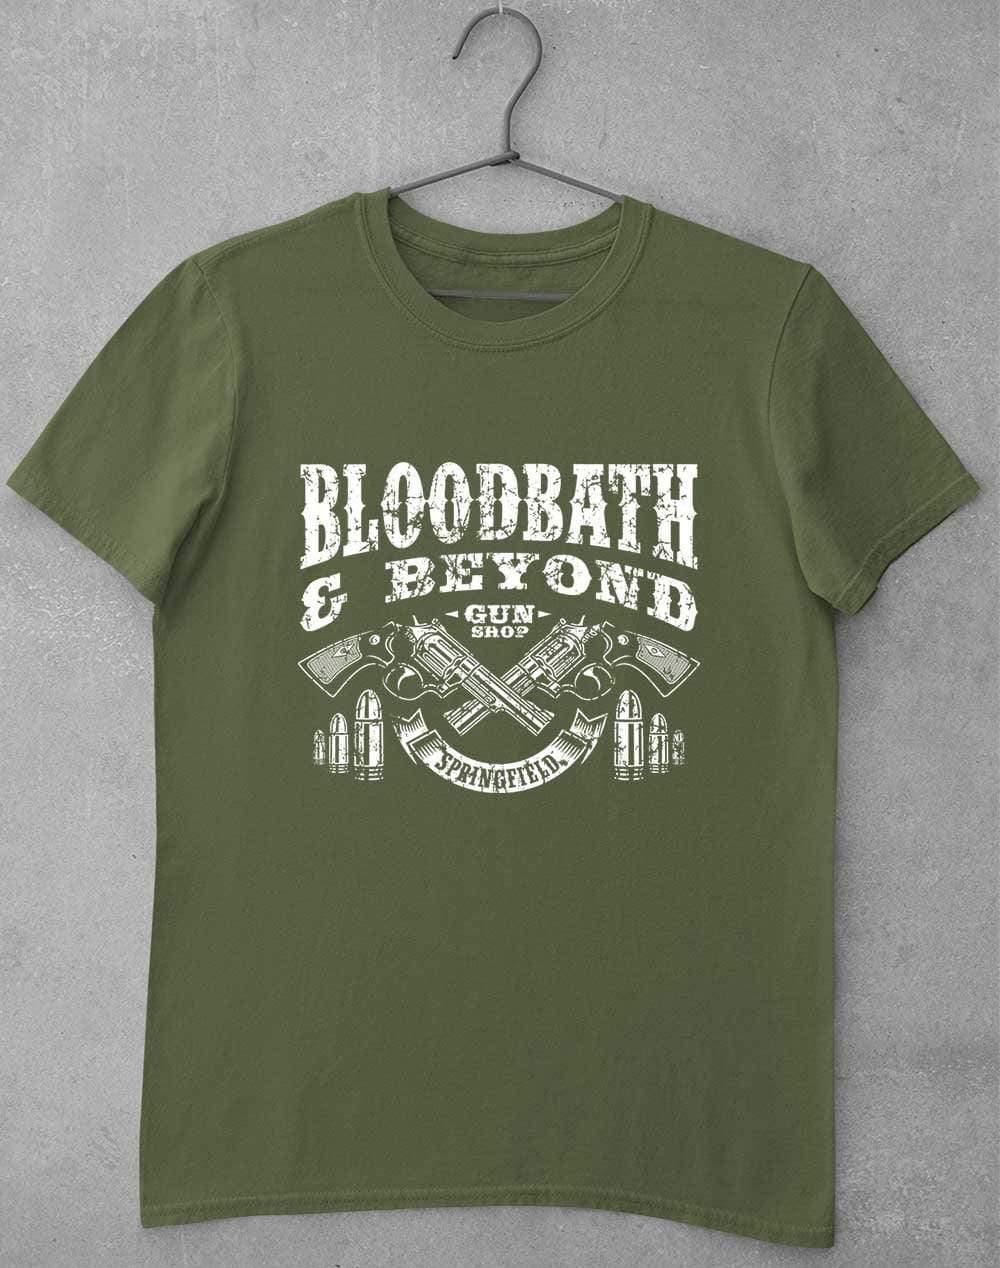 Bloodbath and Beyond T-Shirt S / Military Green  - Off World Tees